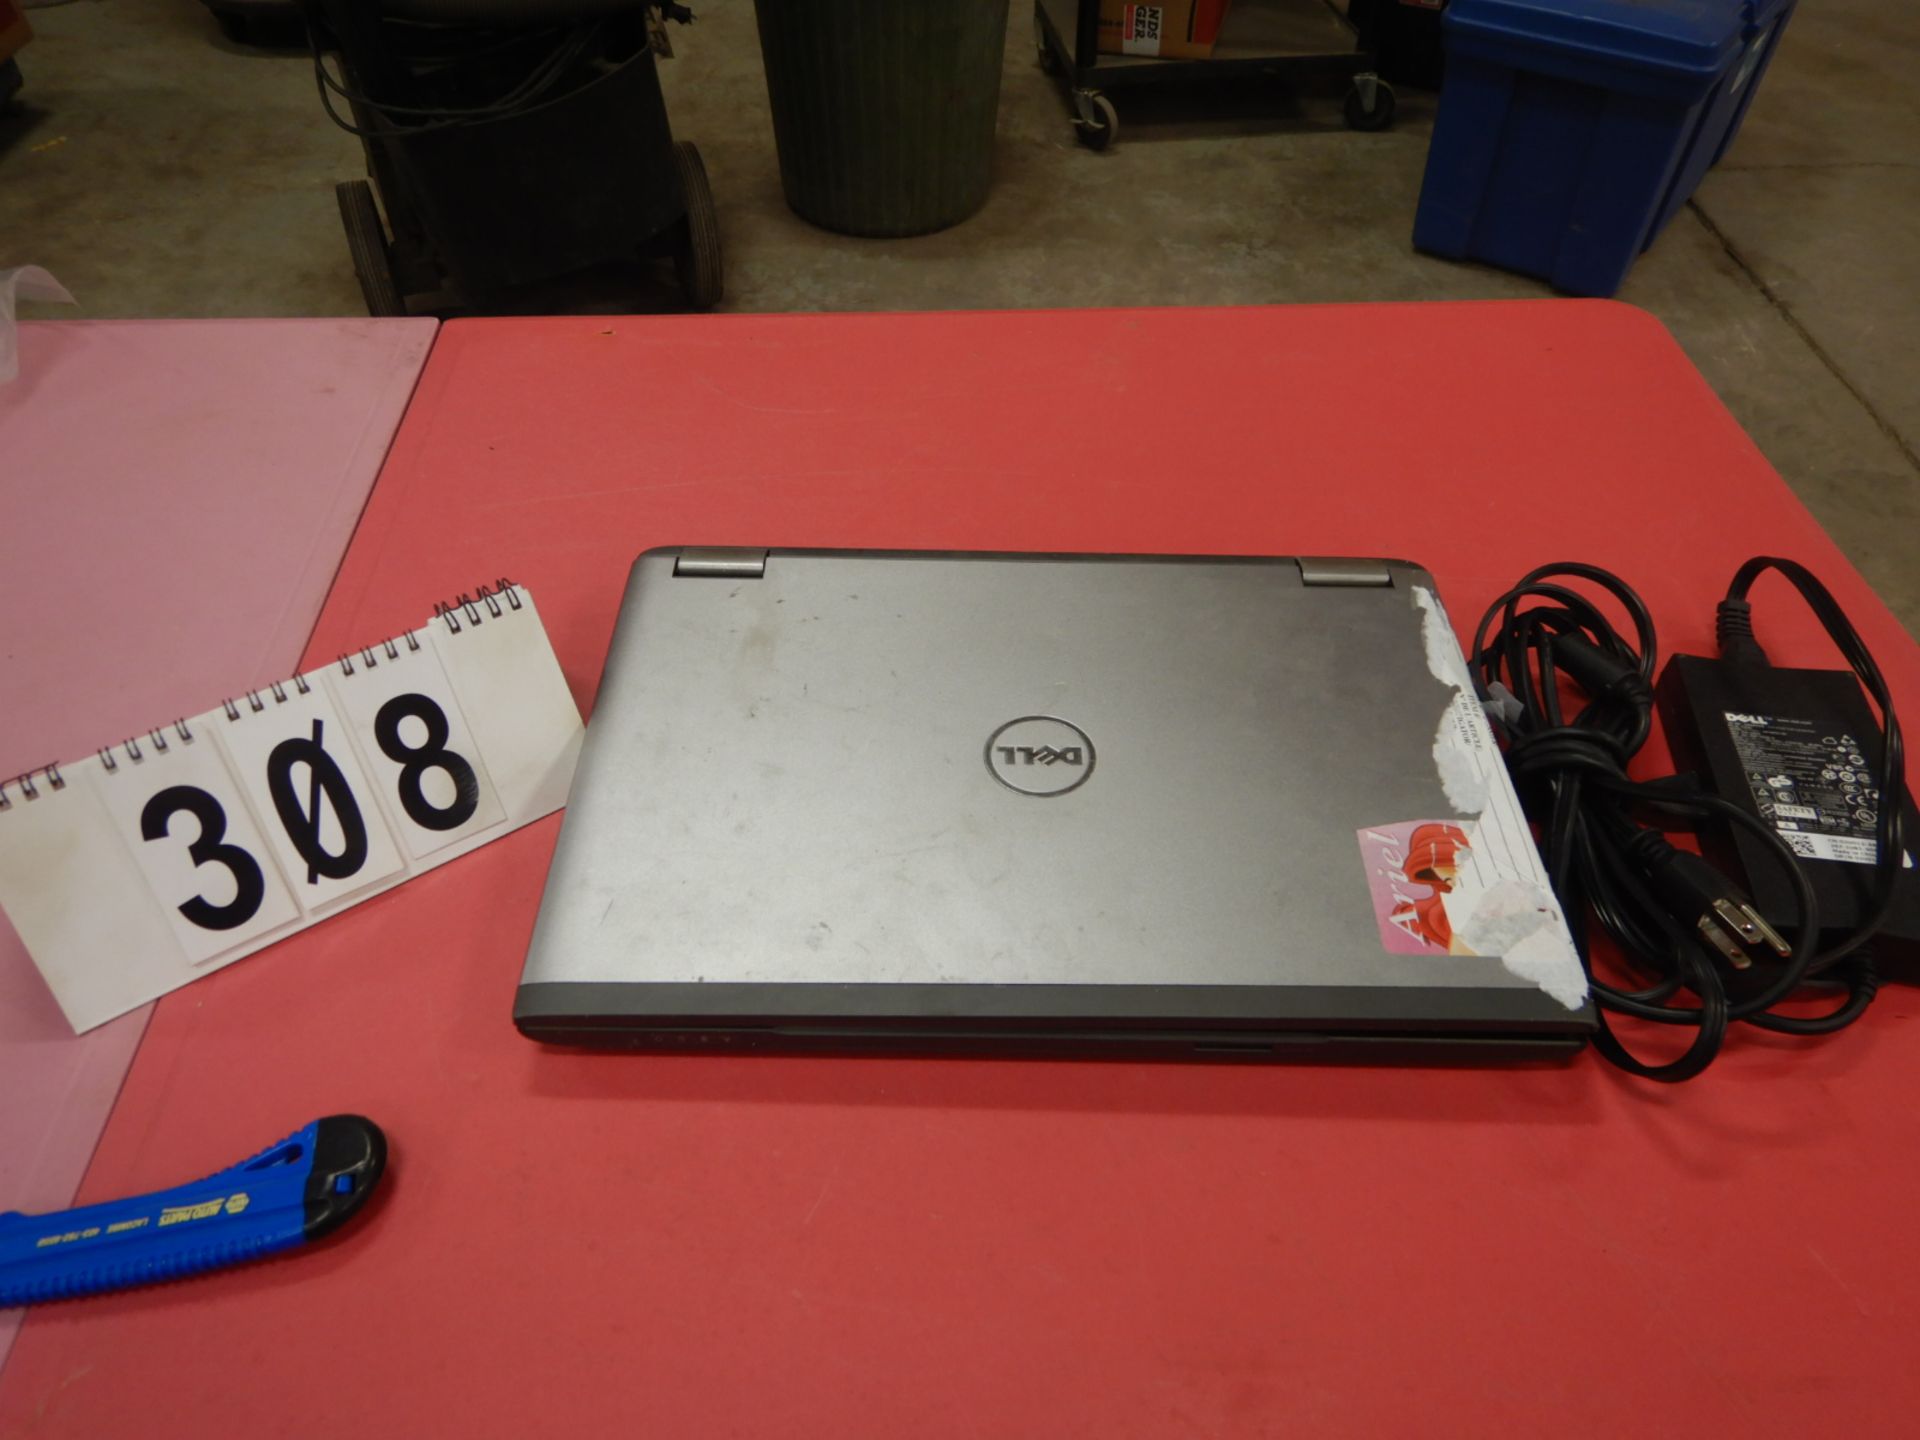 DELL LAPTOP W/ CHARGING CORD - B04 - Image 3 of 3